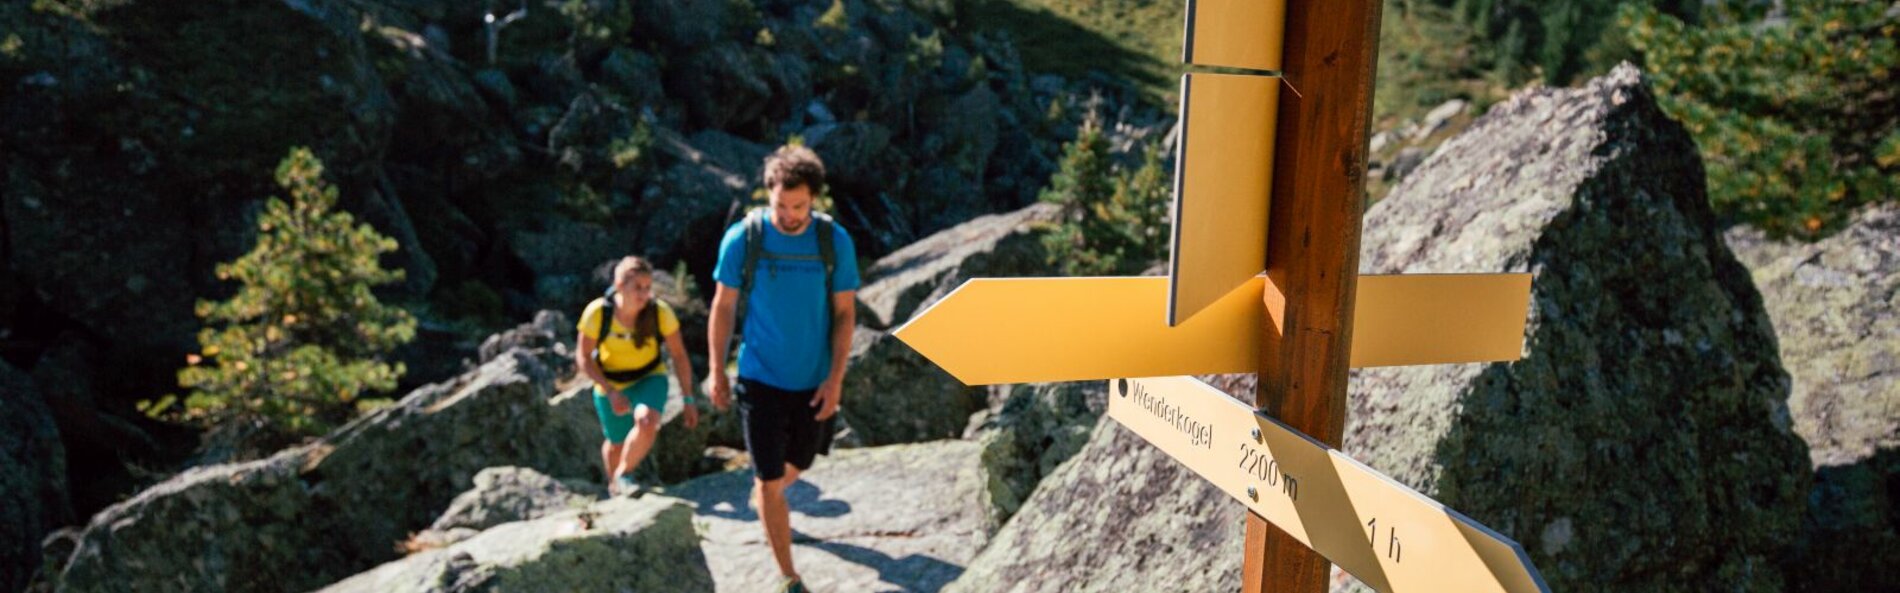 Photo of a path sign. The focus is on the sign, hikers use the path behind it.